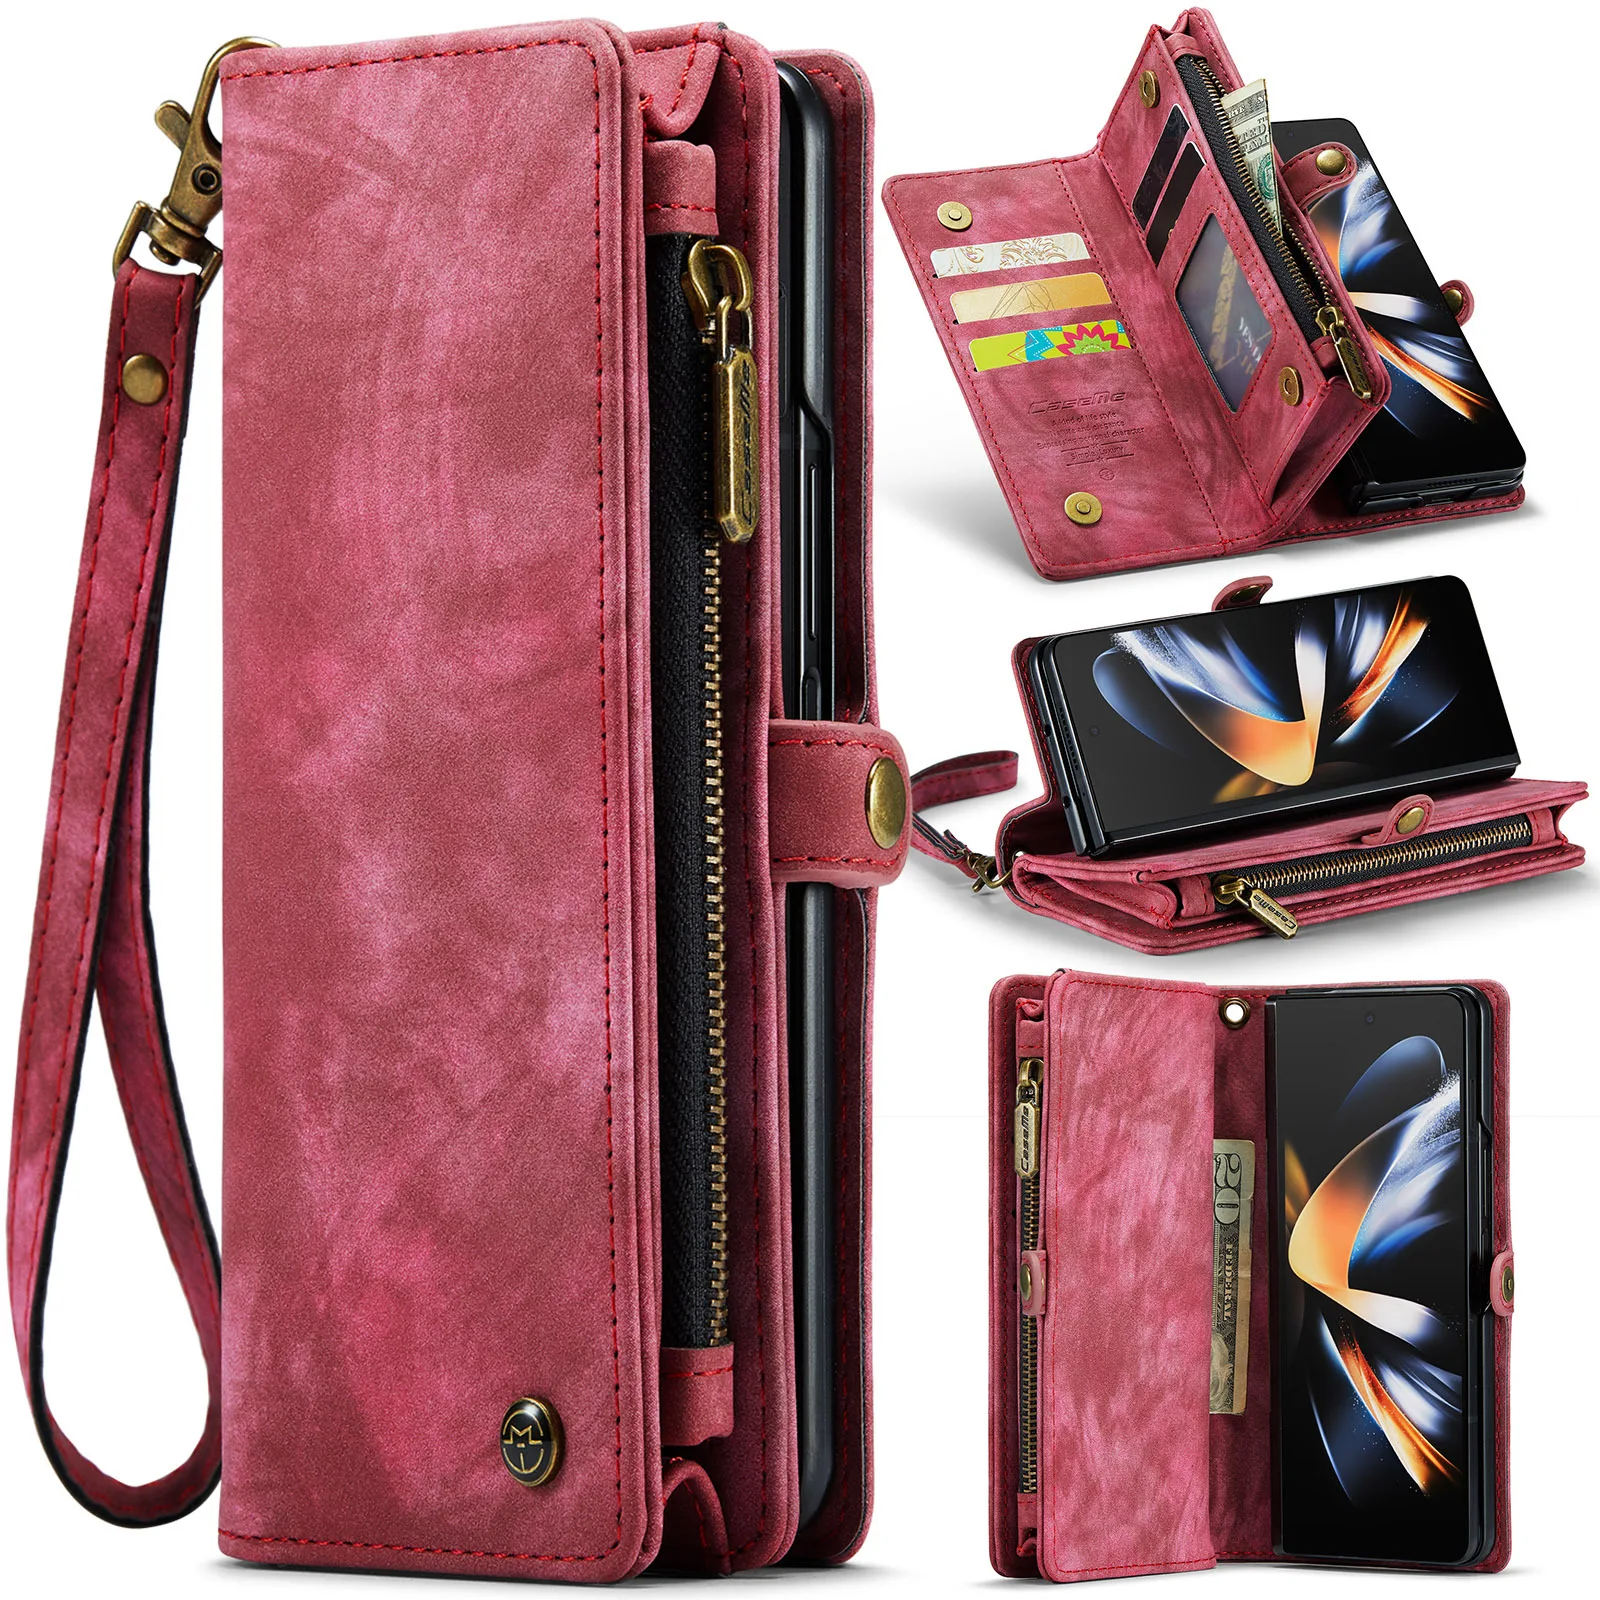 

Wallet Purse Leather Magnetic Phone Case Cover Bag Business Pouch For Samsung Galaxy Galaxy Z Fold4 Fold 4 Card Cash Pocket